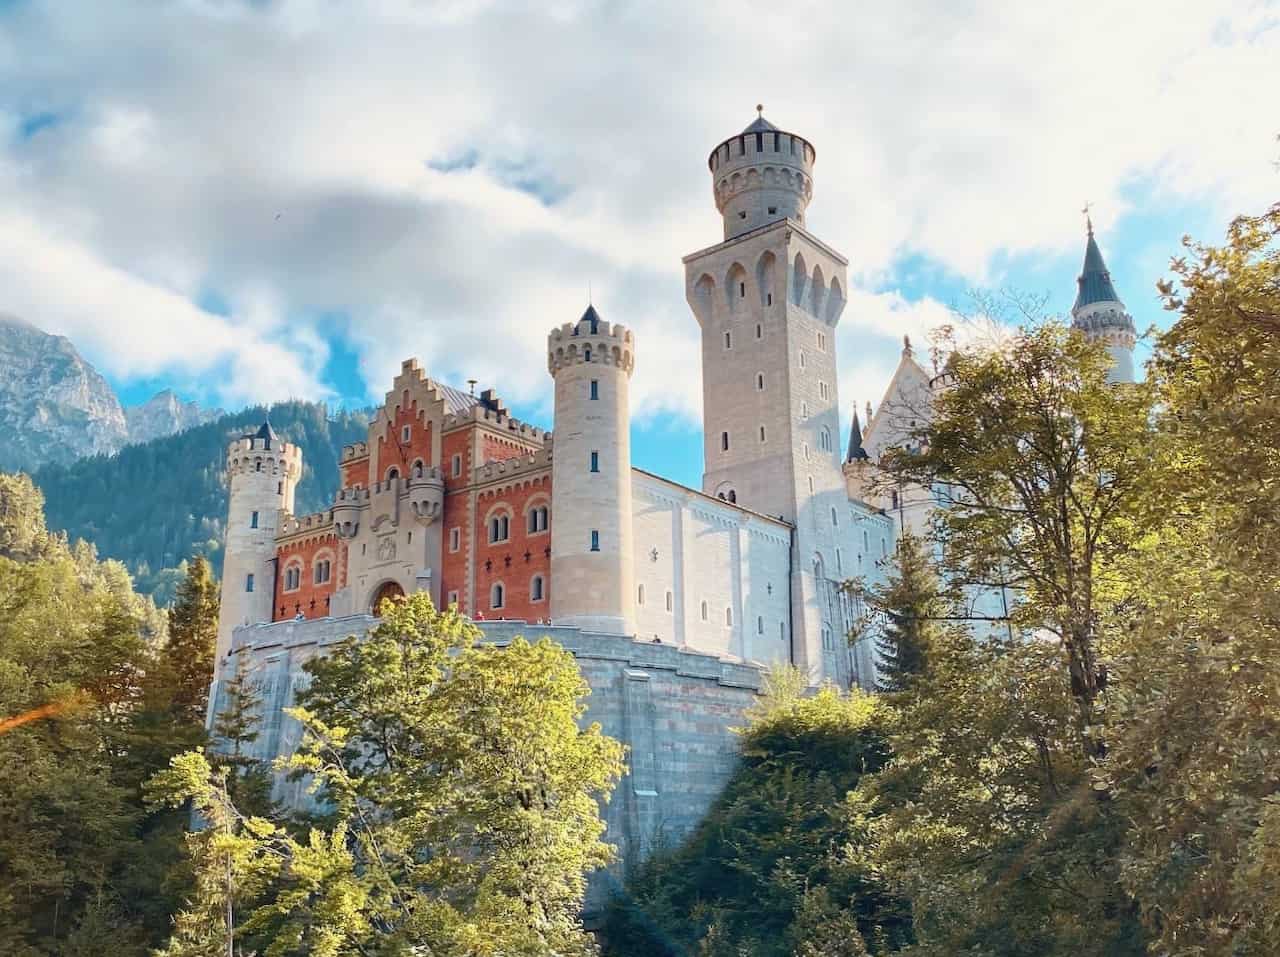 A tour of King Ludwig II’s Castles